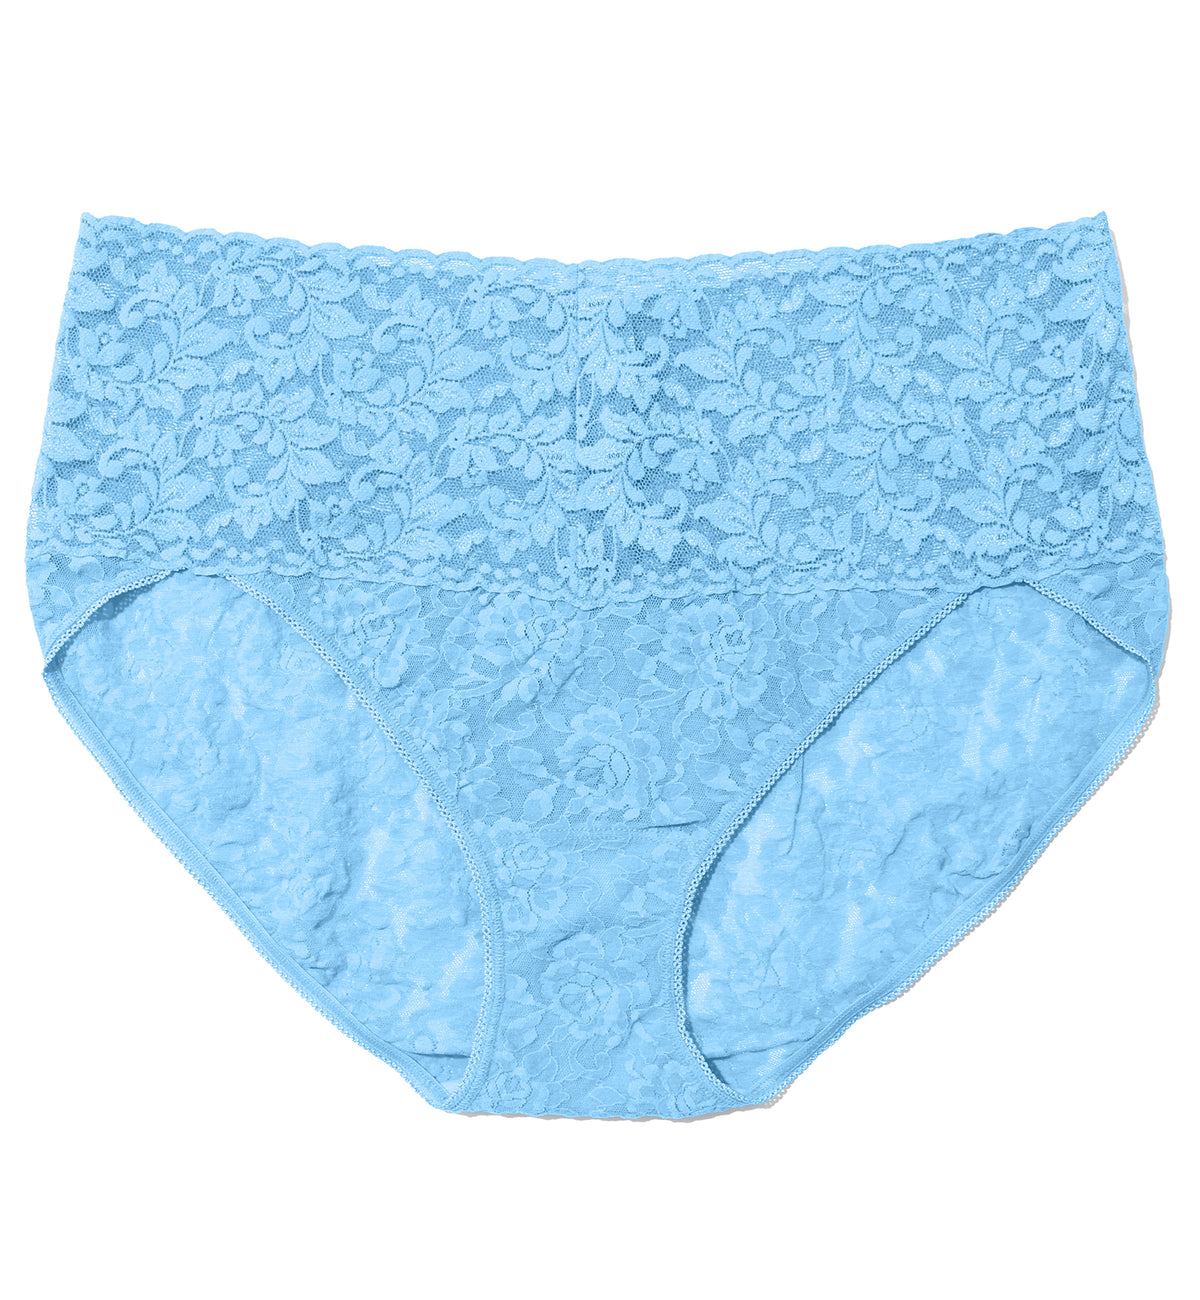 Hanky Panky Retro Lace V-kini PLUS (9K2124X),1X,Partly Cloudy - Partly Cloudy,1X